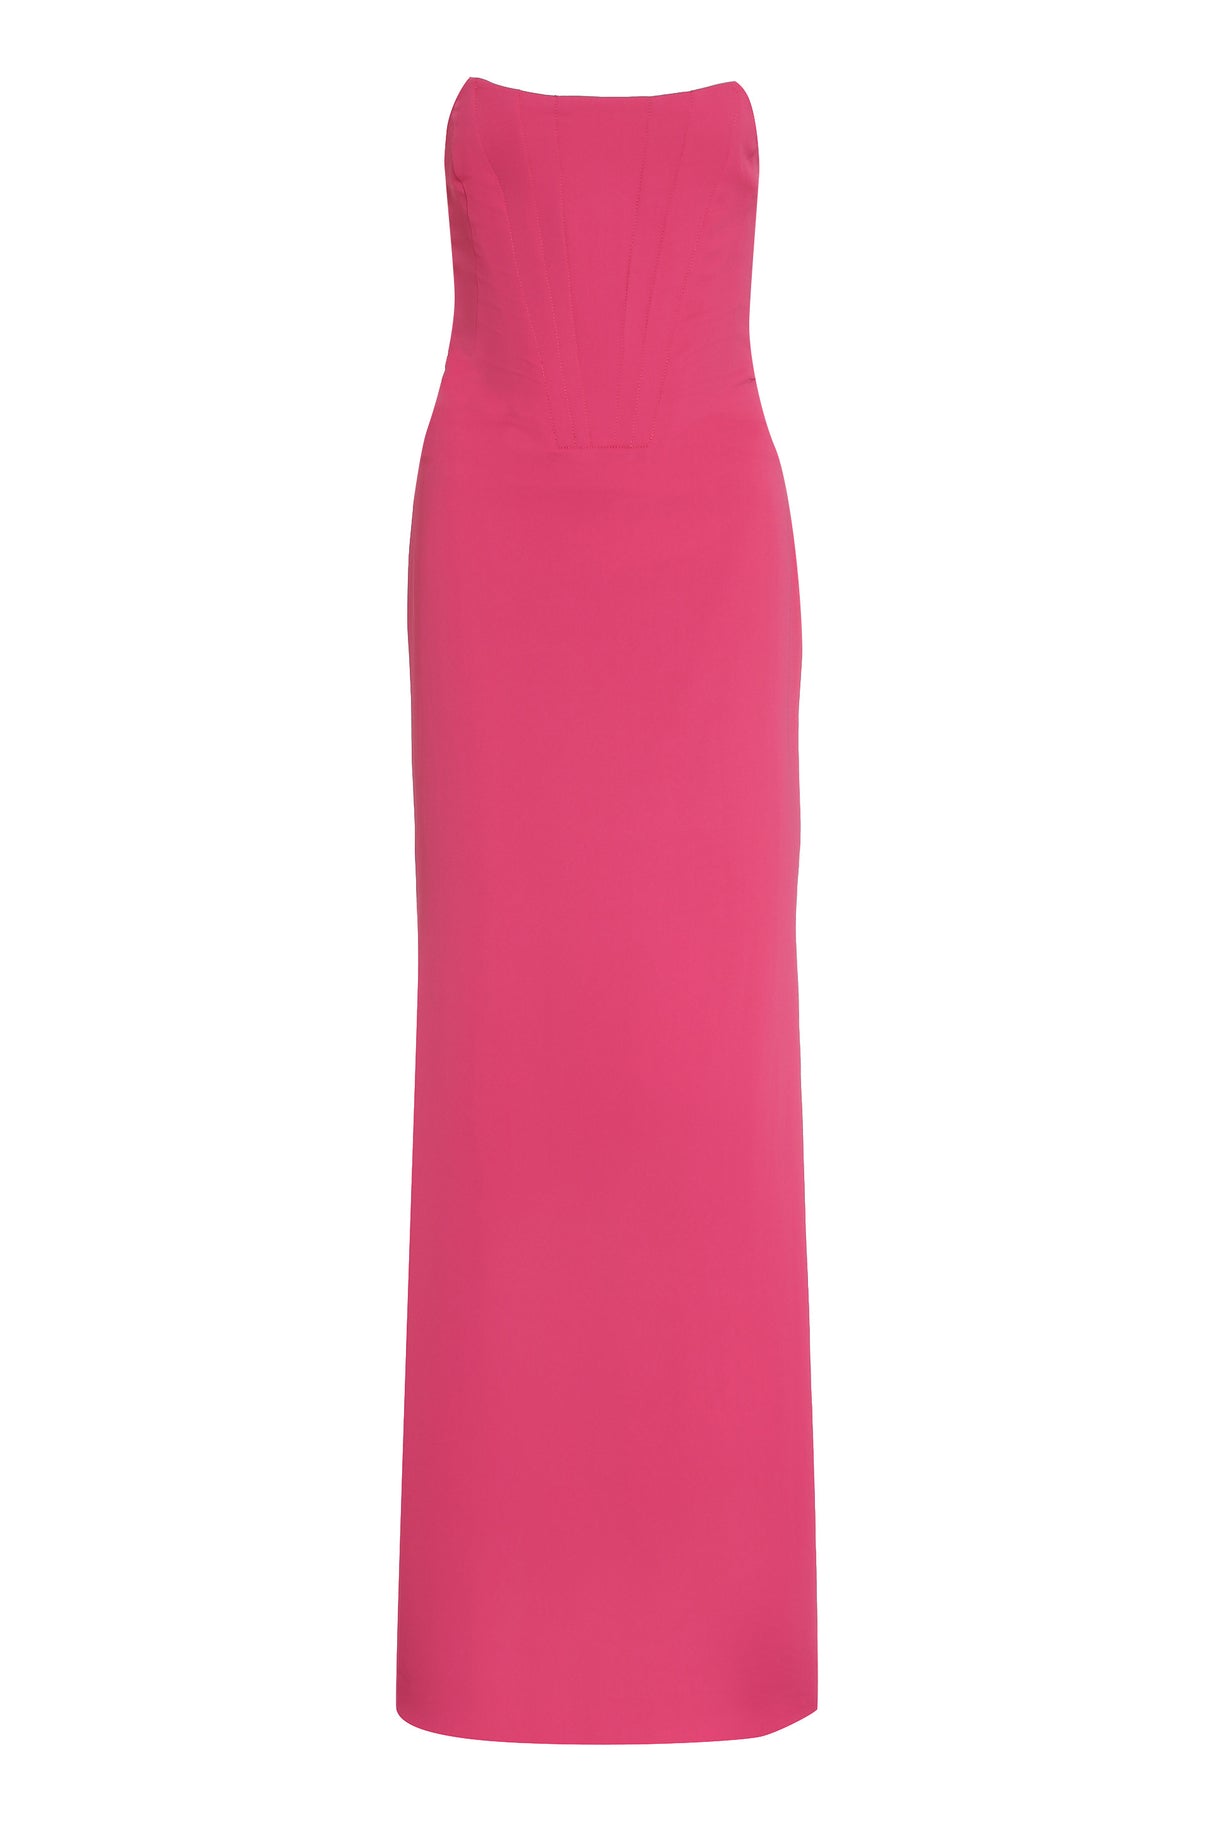 Fuchsia Corset Dress with Back Train for Women - SS23 Collection